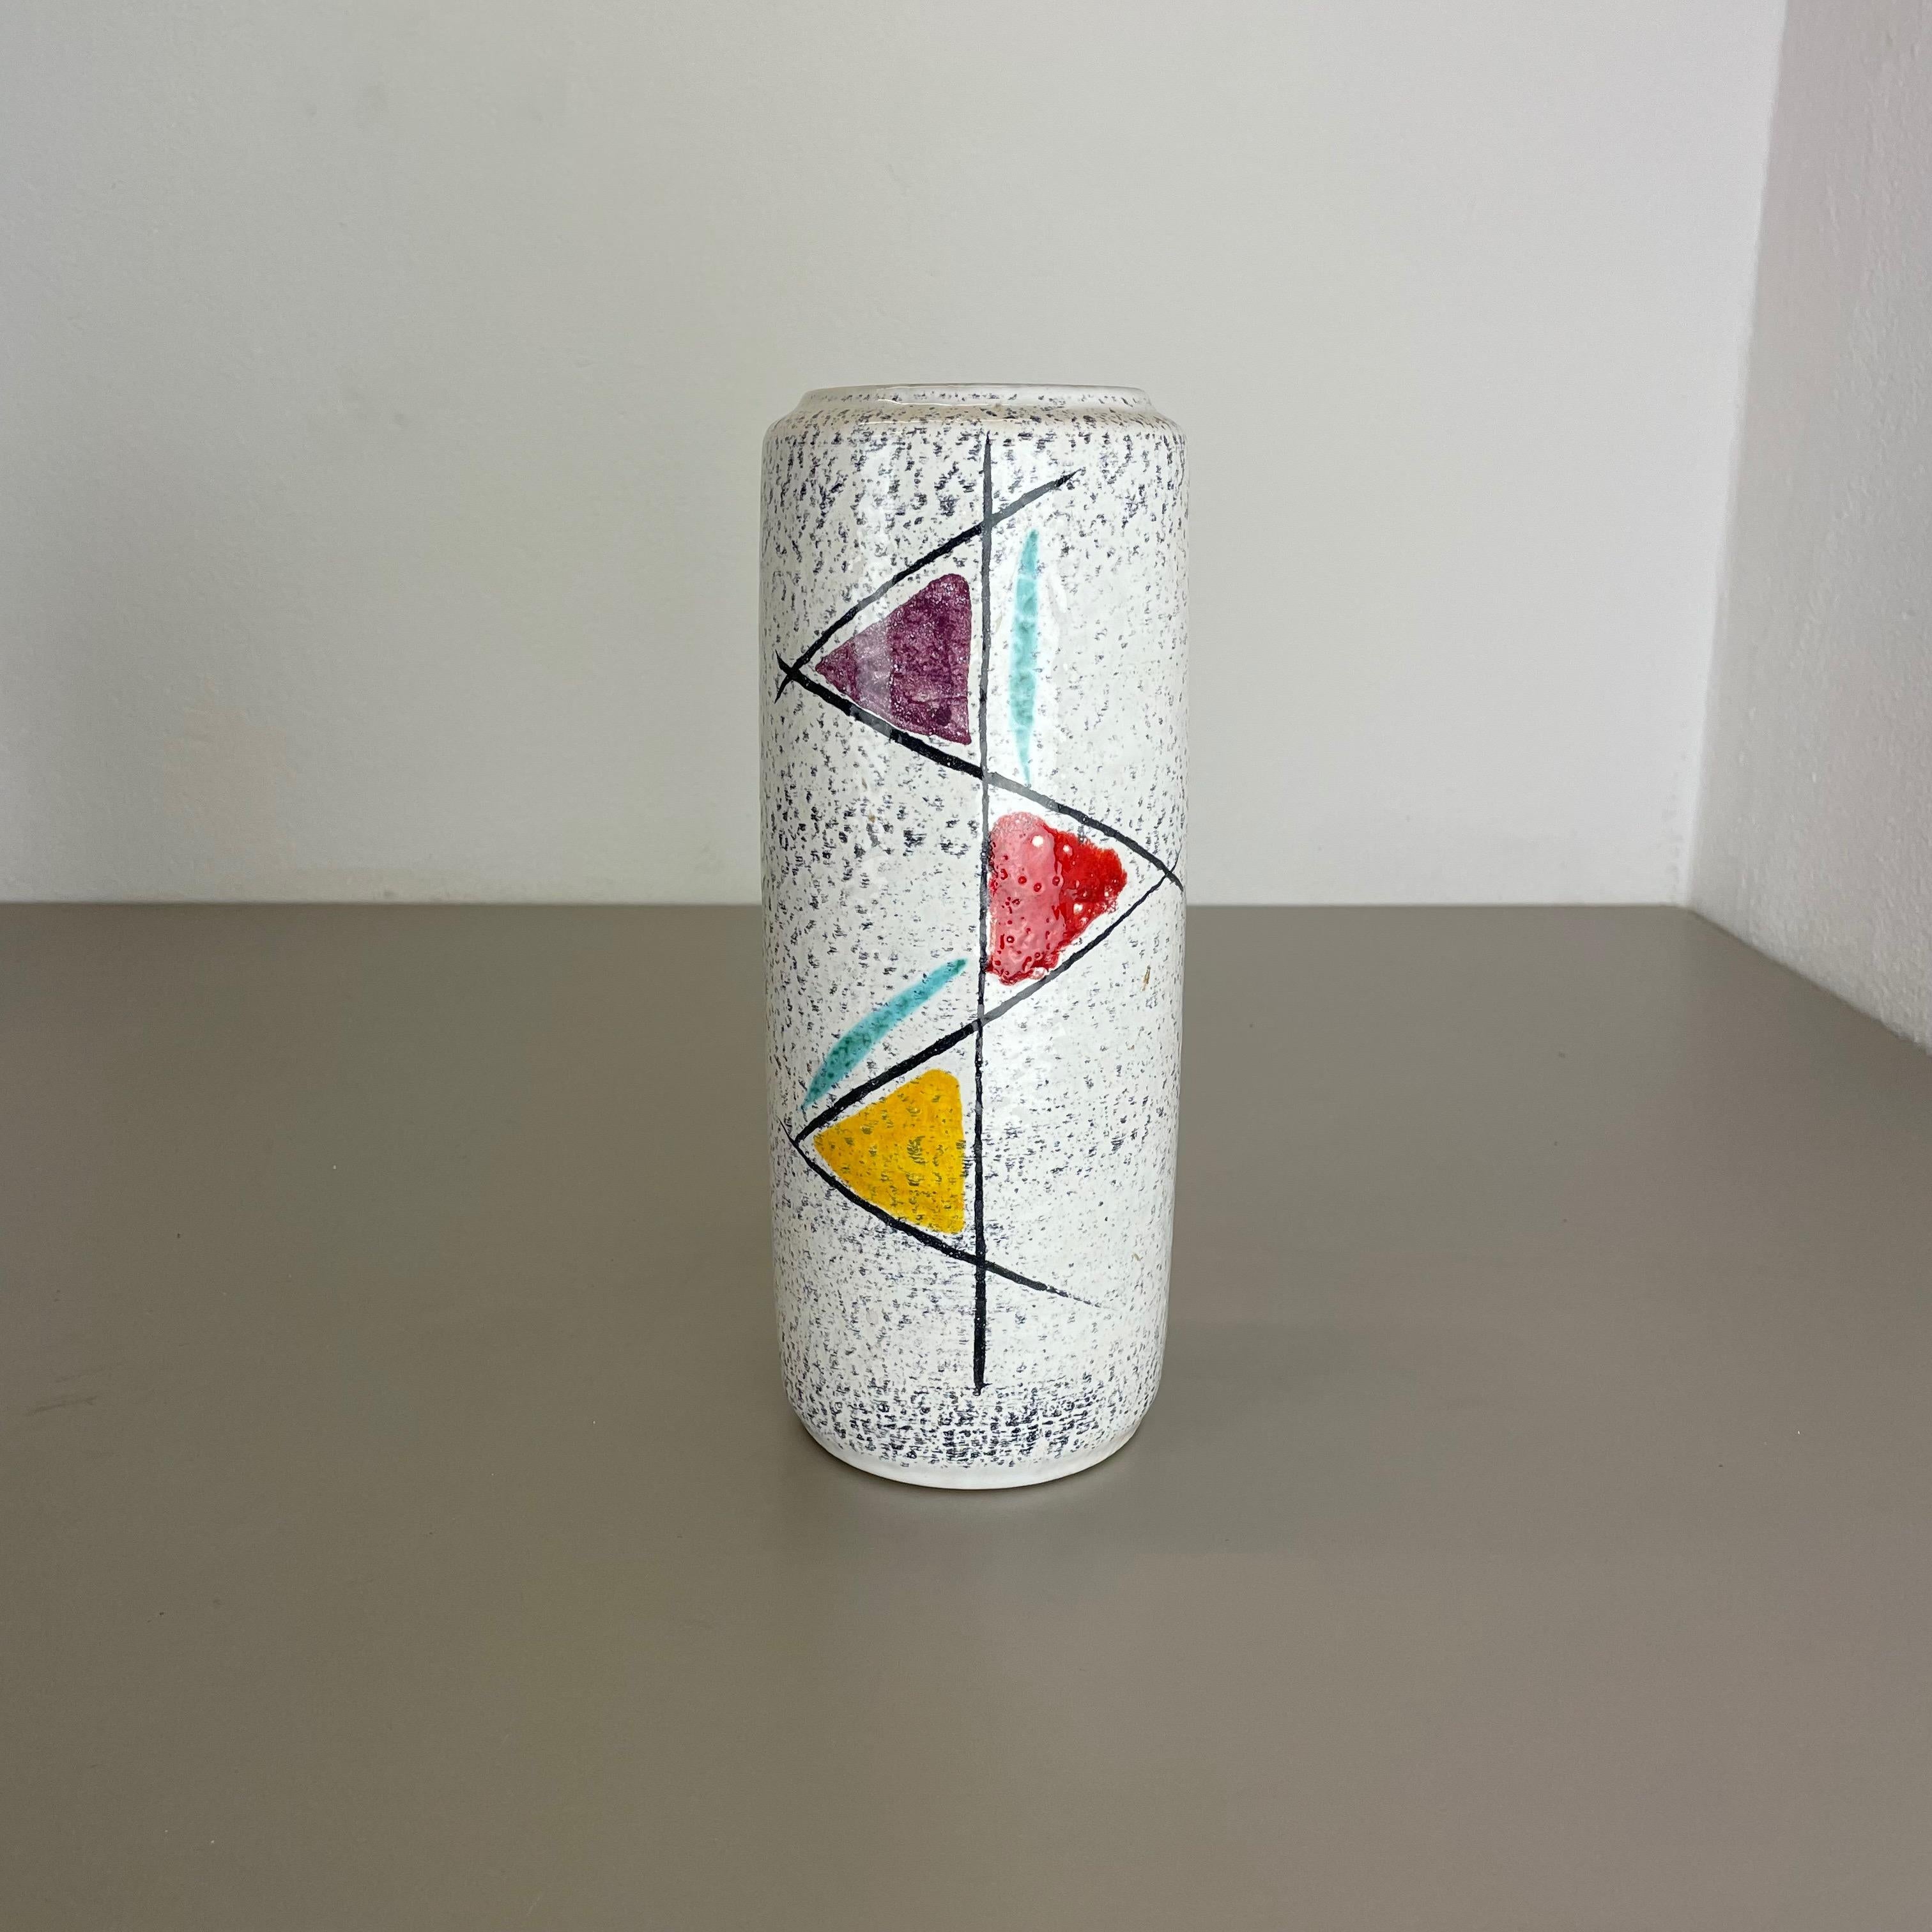 Article:

Fat lava art vase


Producer:

Scheurich, Germany



Decade:

1970s




This original vintage vase was produced in the 1970s in Germany. It is made of ceramic pottery in fat lava optic with abstract graphic illustration